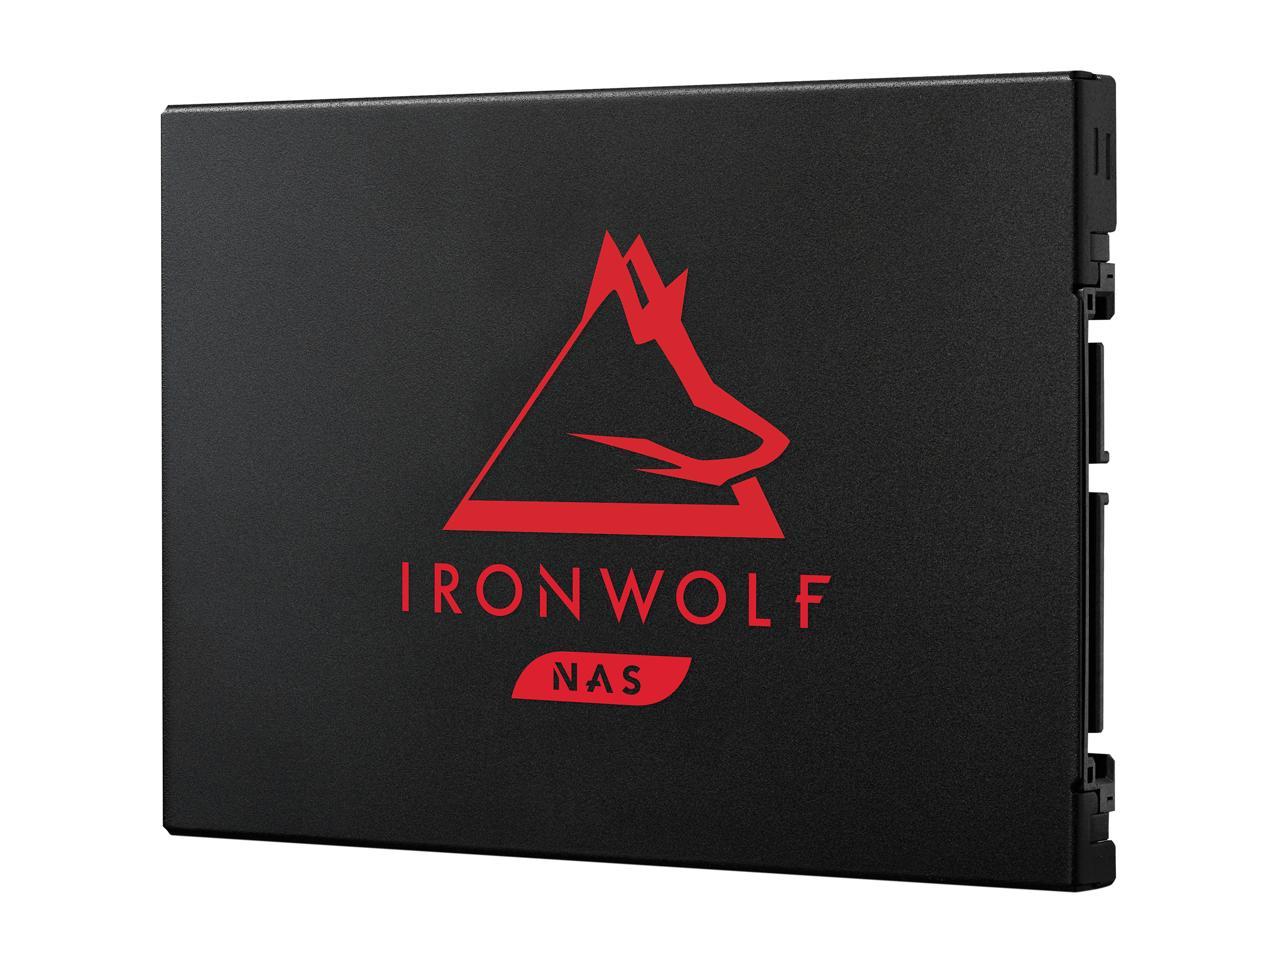 Seagate IronWolf 125 SSD 4TB NAS Internal Solid State Drive - 2.5 Inch SATA 6Gb/s Speeds of up to 560 MB/s, 0.7 DWPD Endurance and 24x7 Performance for Creative Pro and SMB/SME (ZA4000NM1A002)